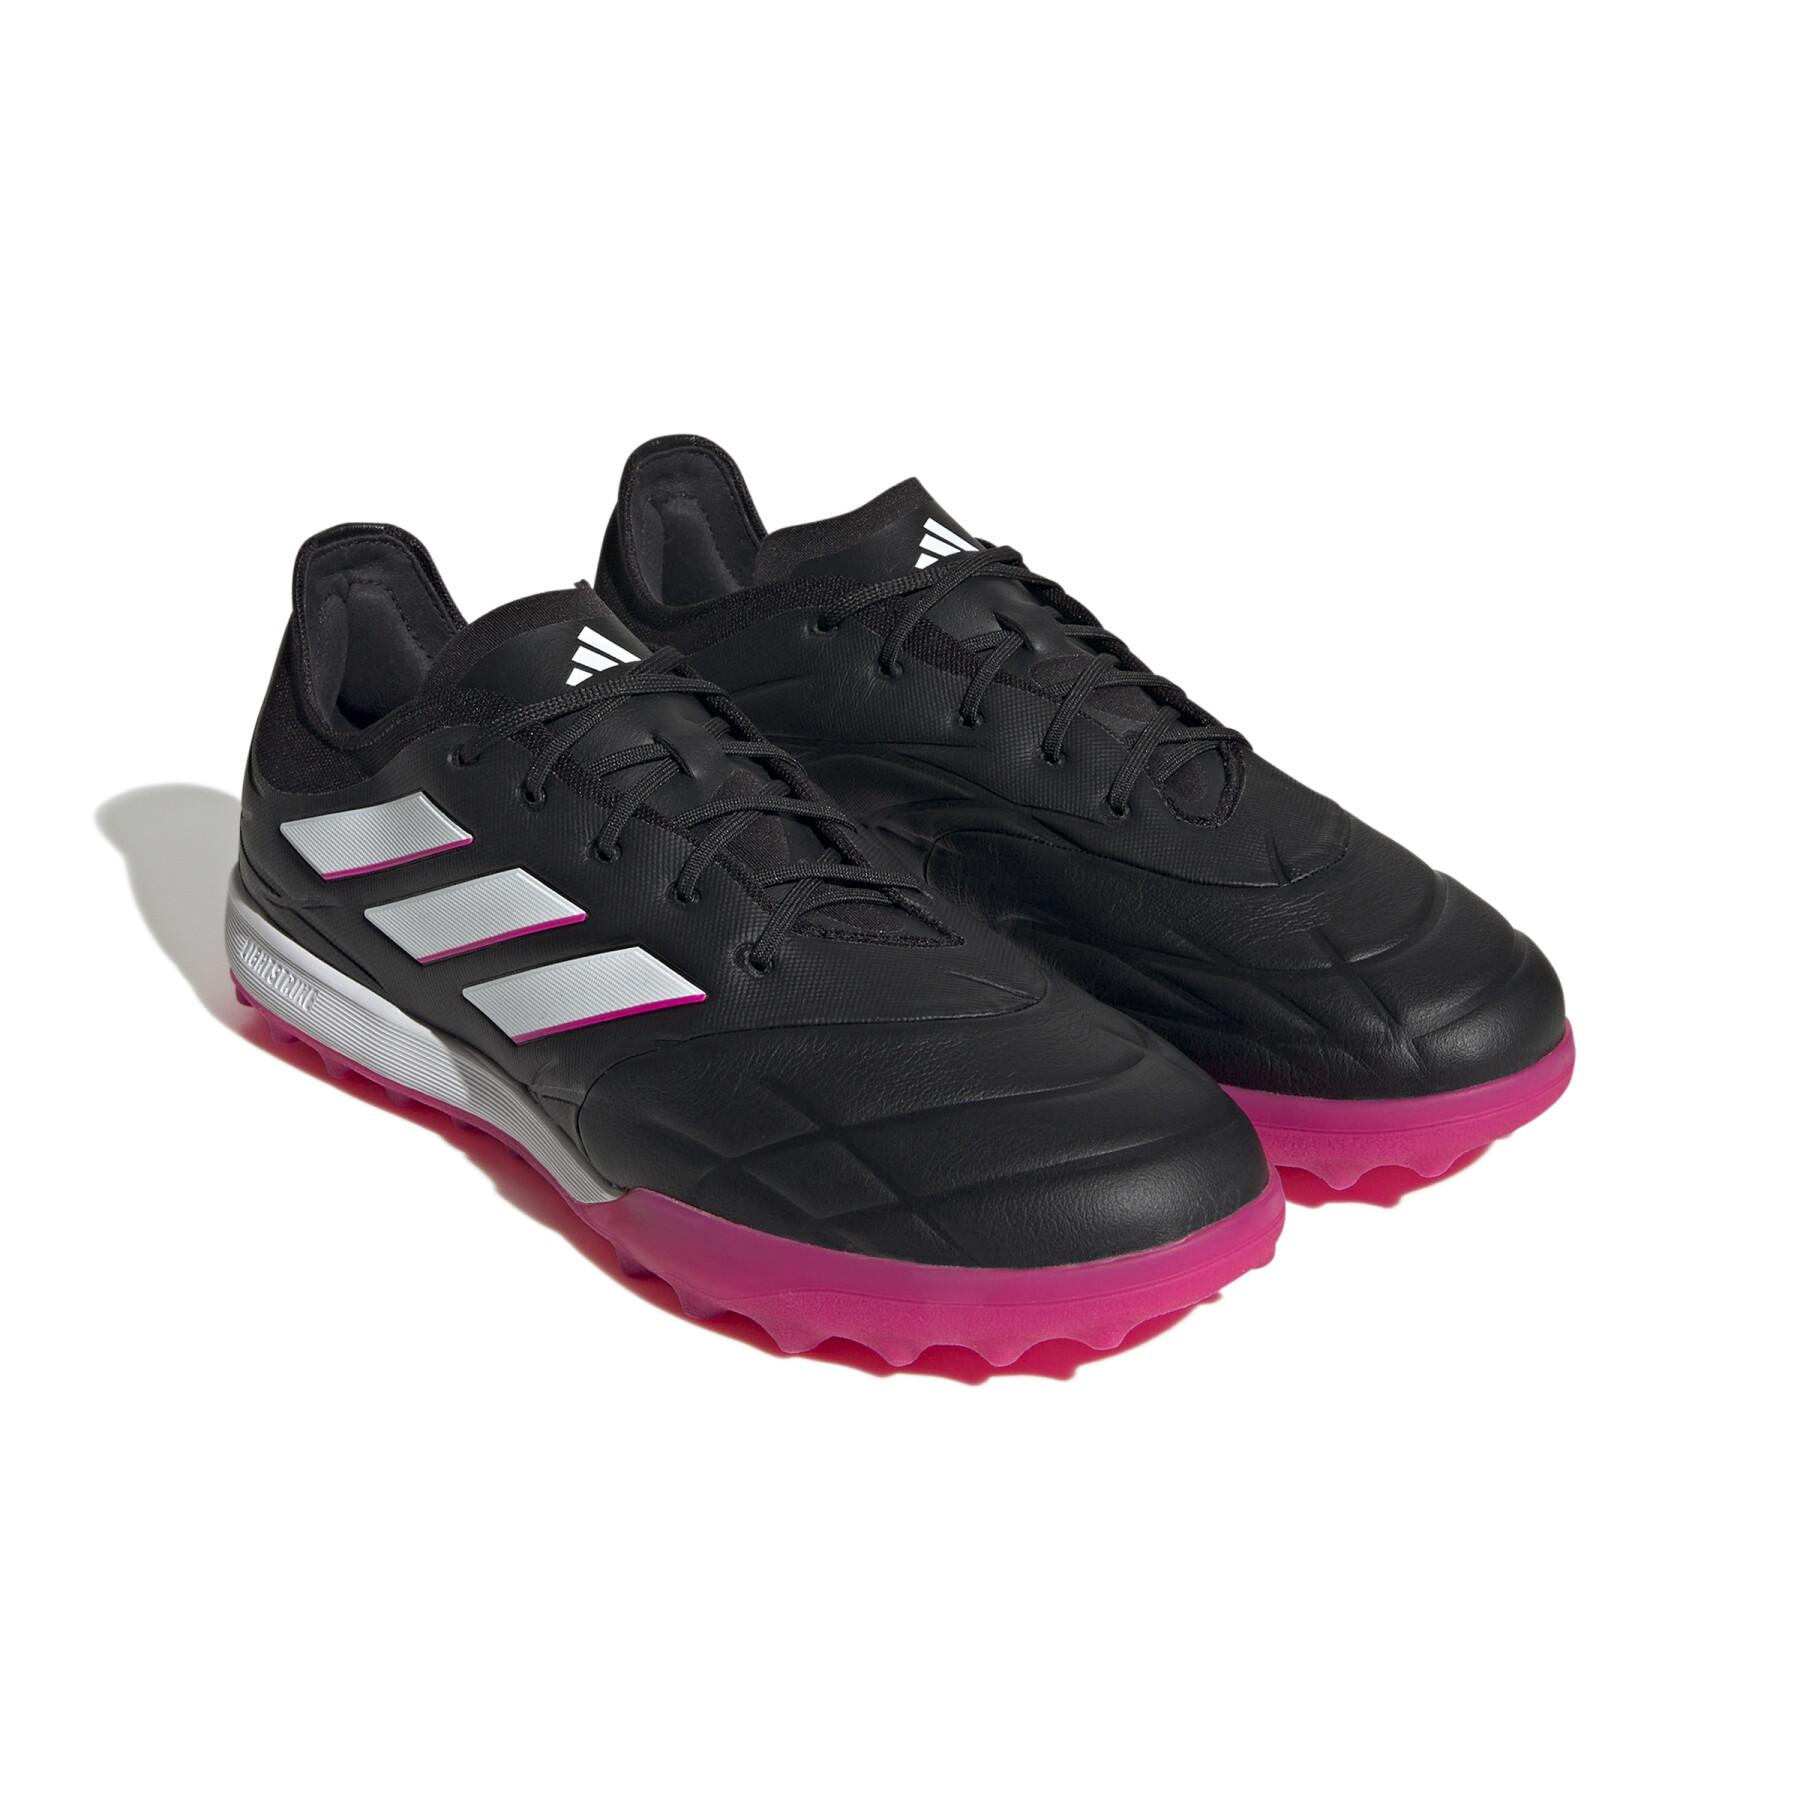 Soccer shoes adidas Copa Pure.1 Turf